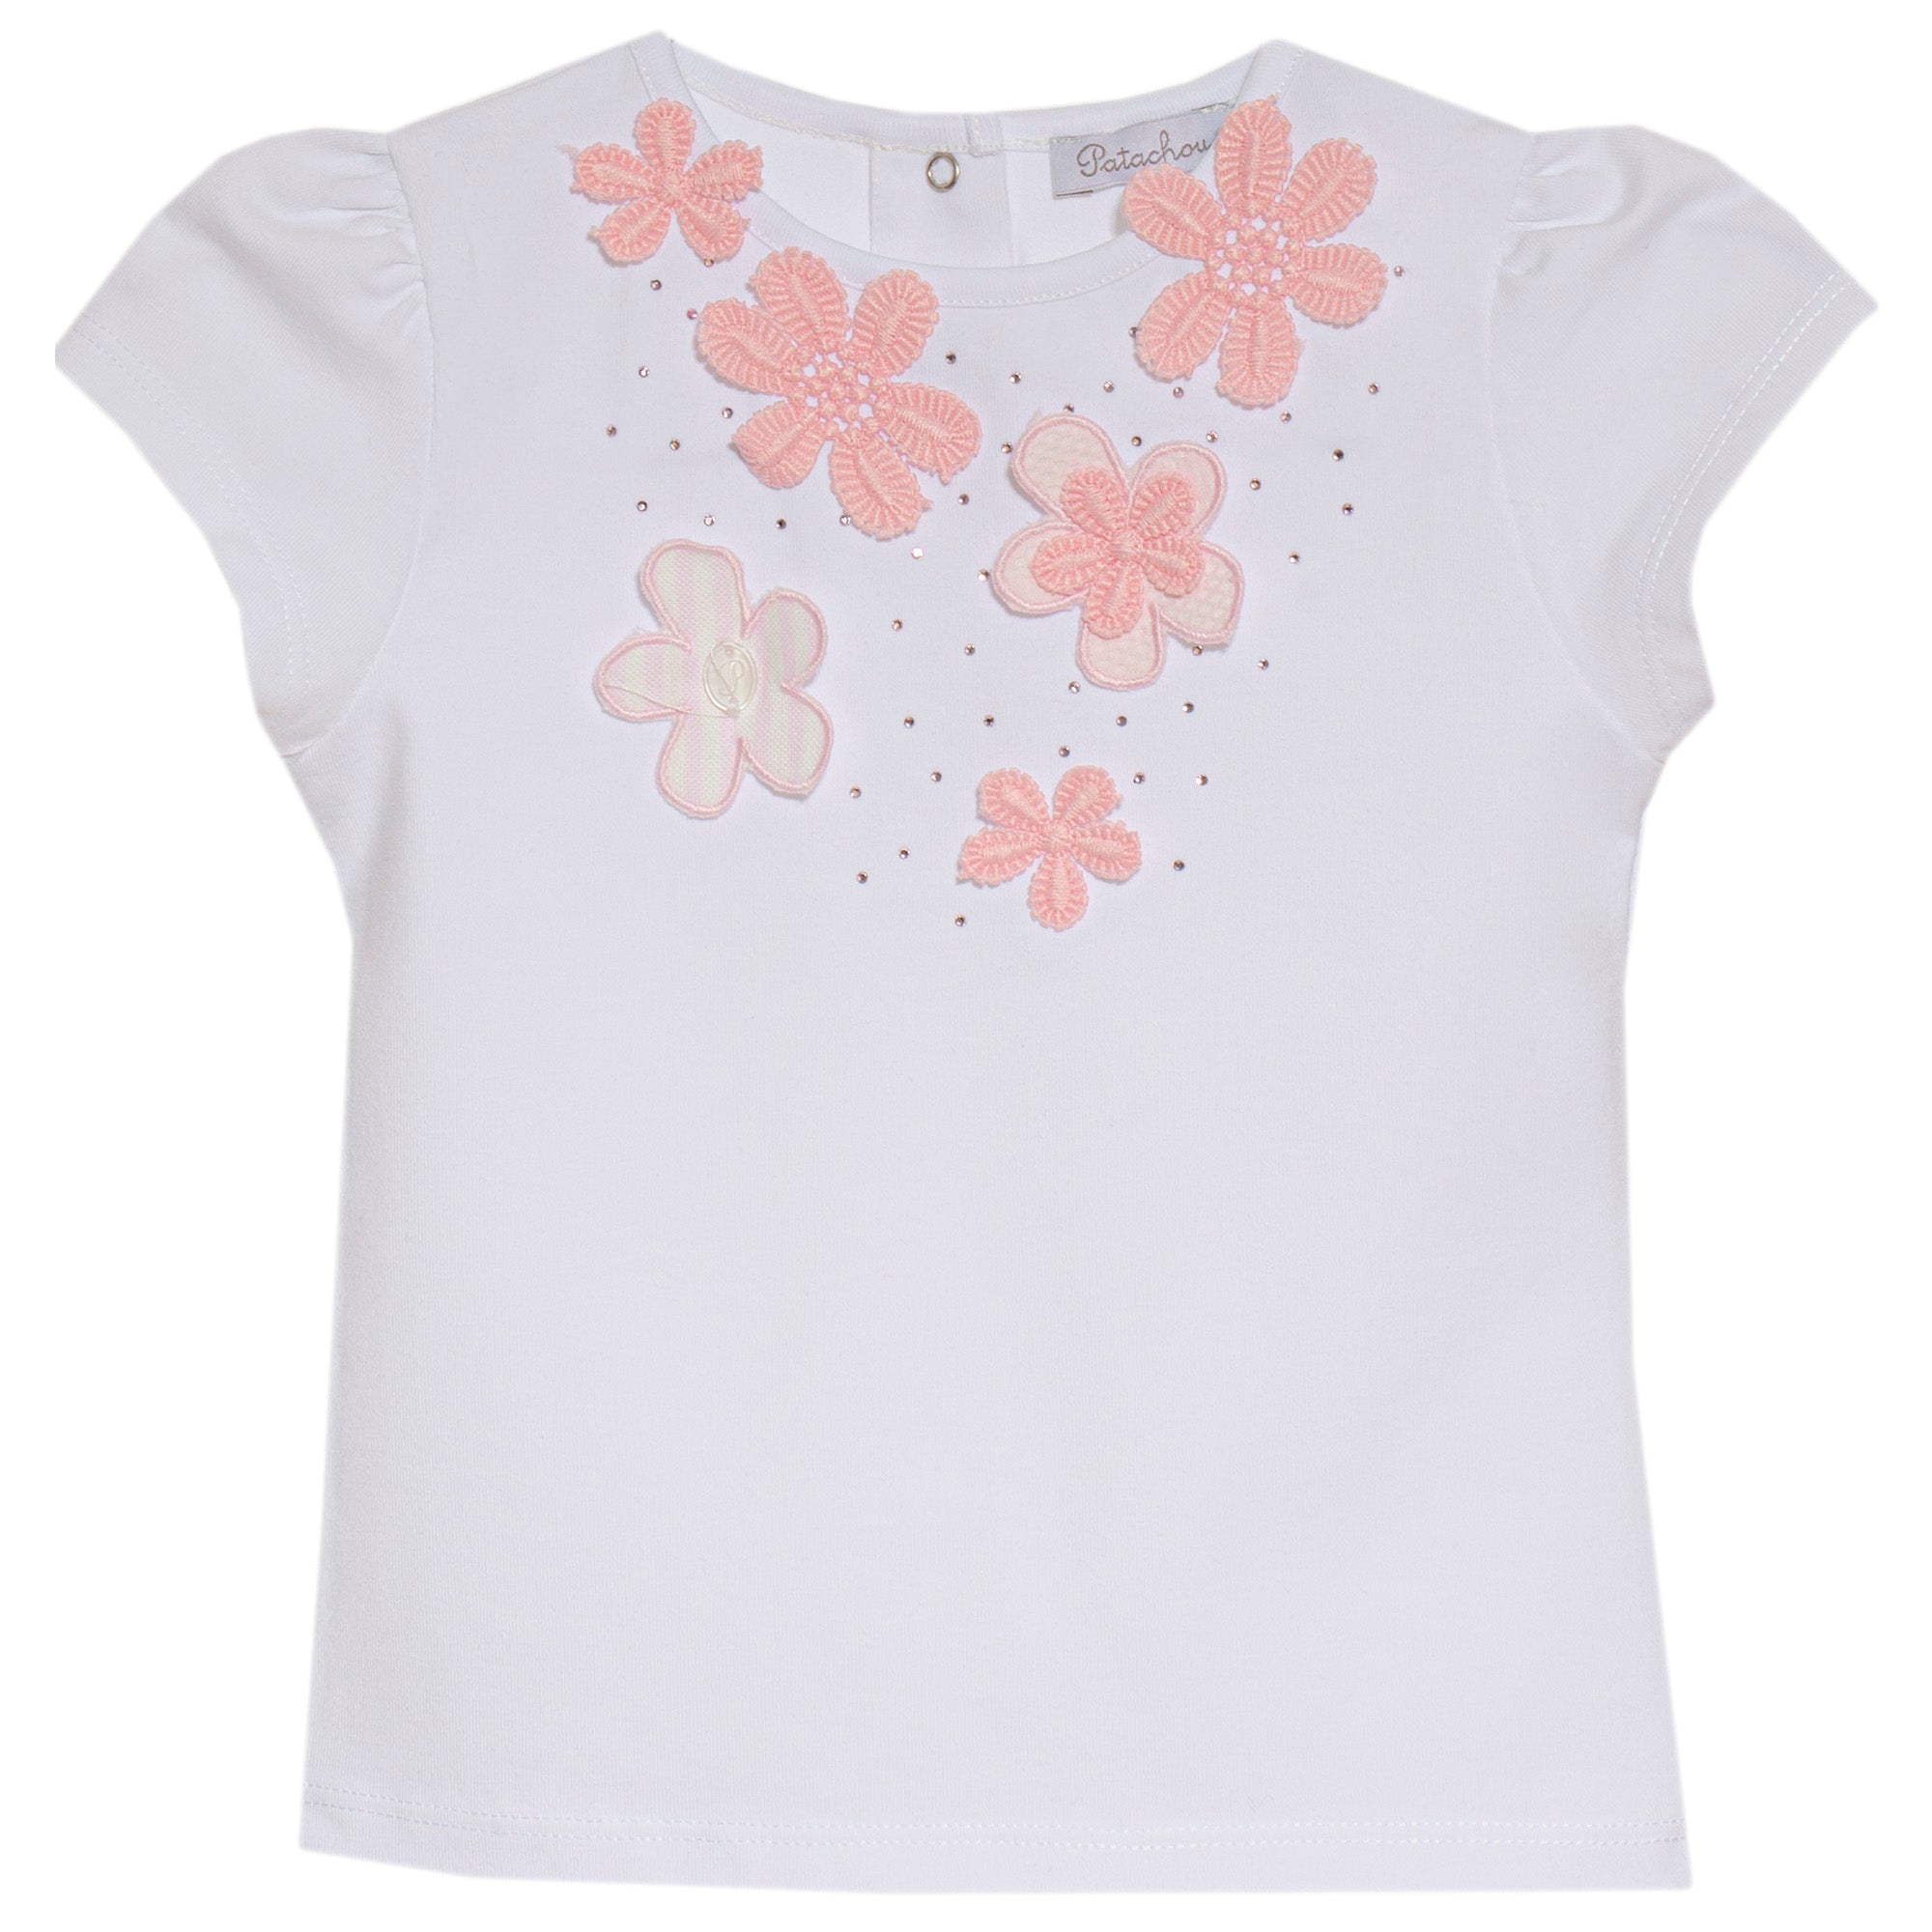 patachou girls top with pink applique flowers